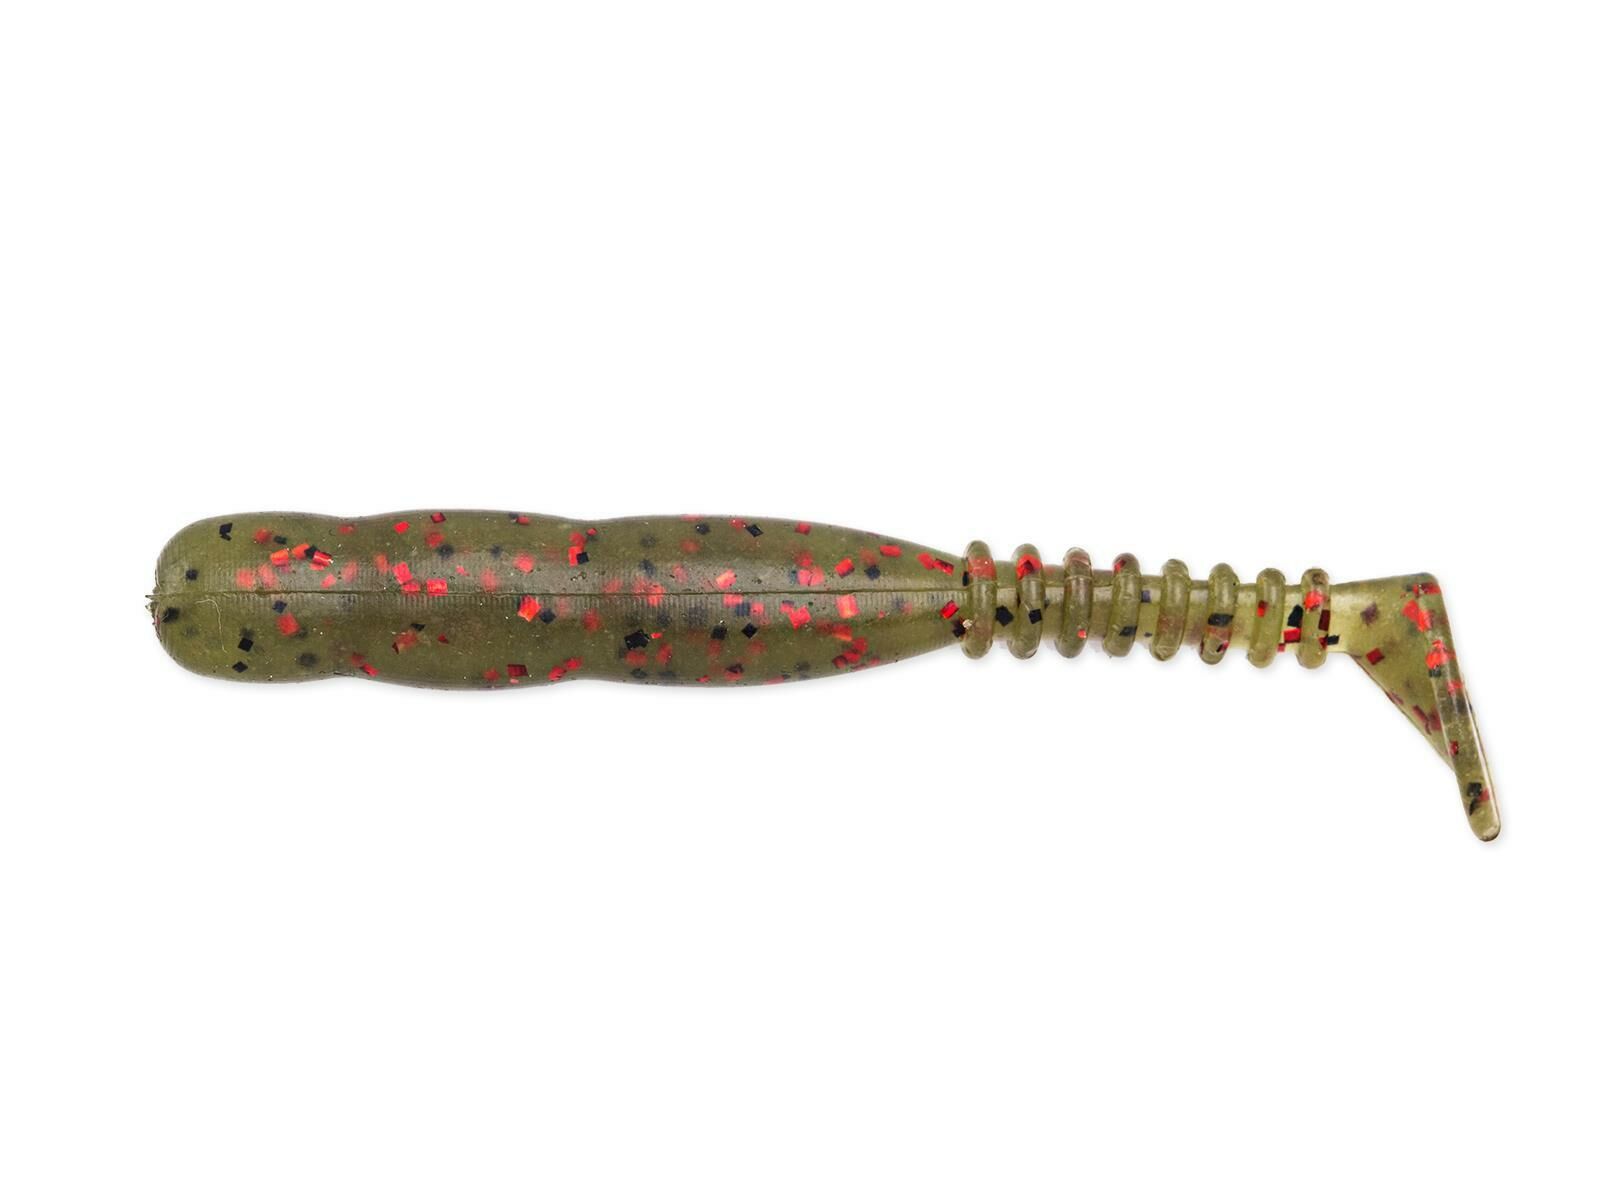 2" Rockvibe Shad - Watermelon Red